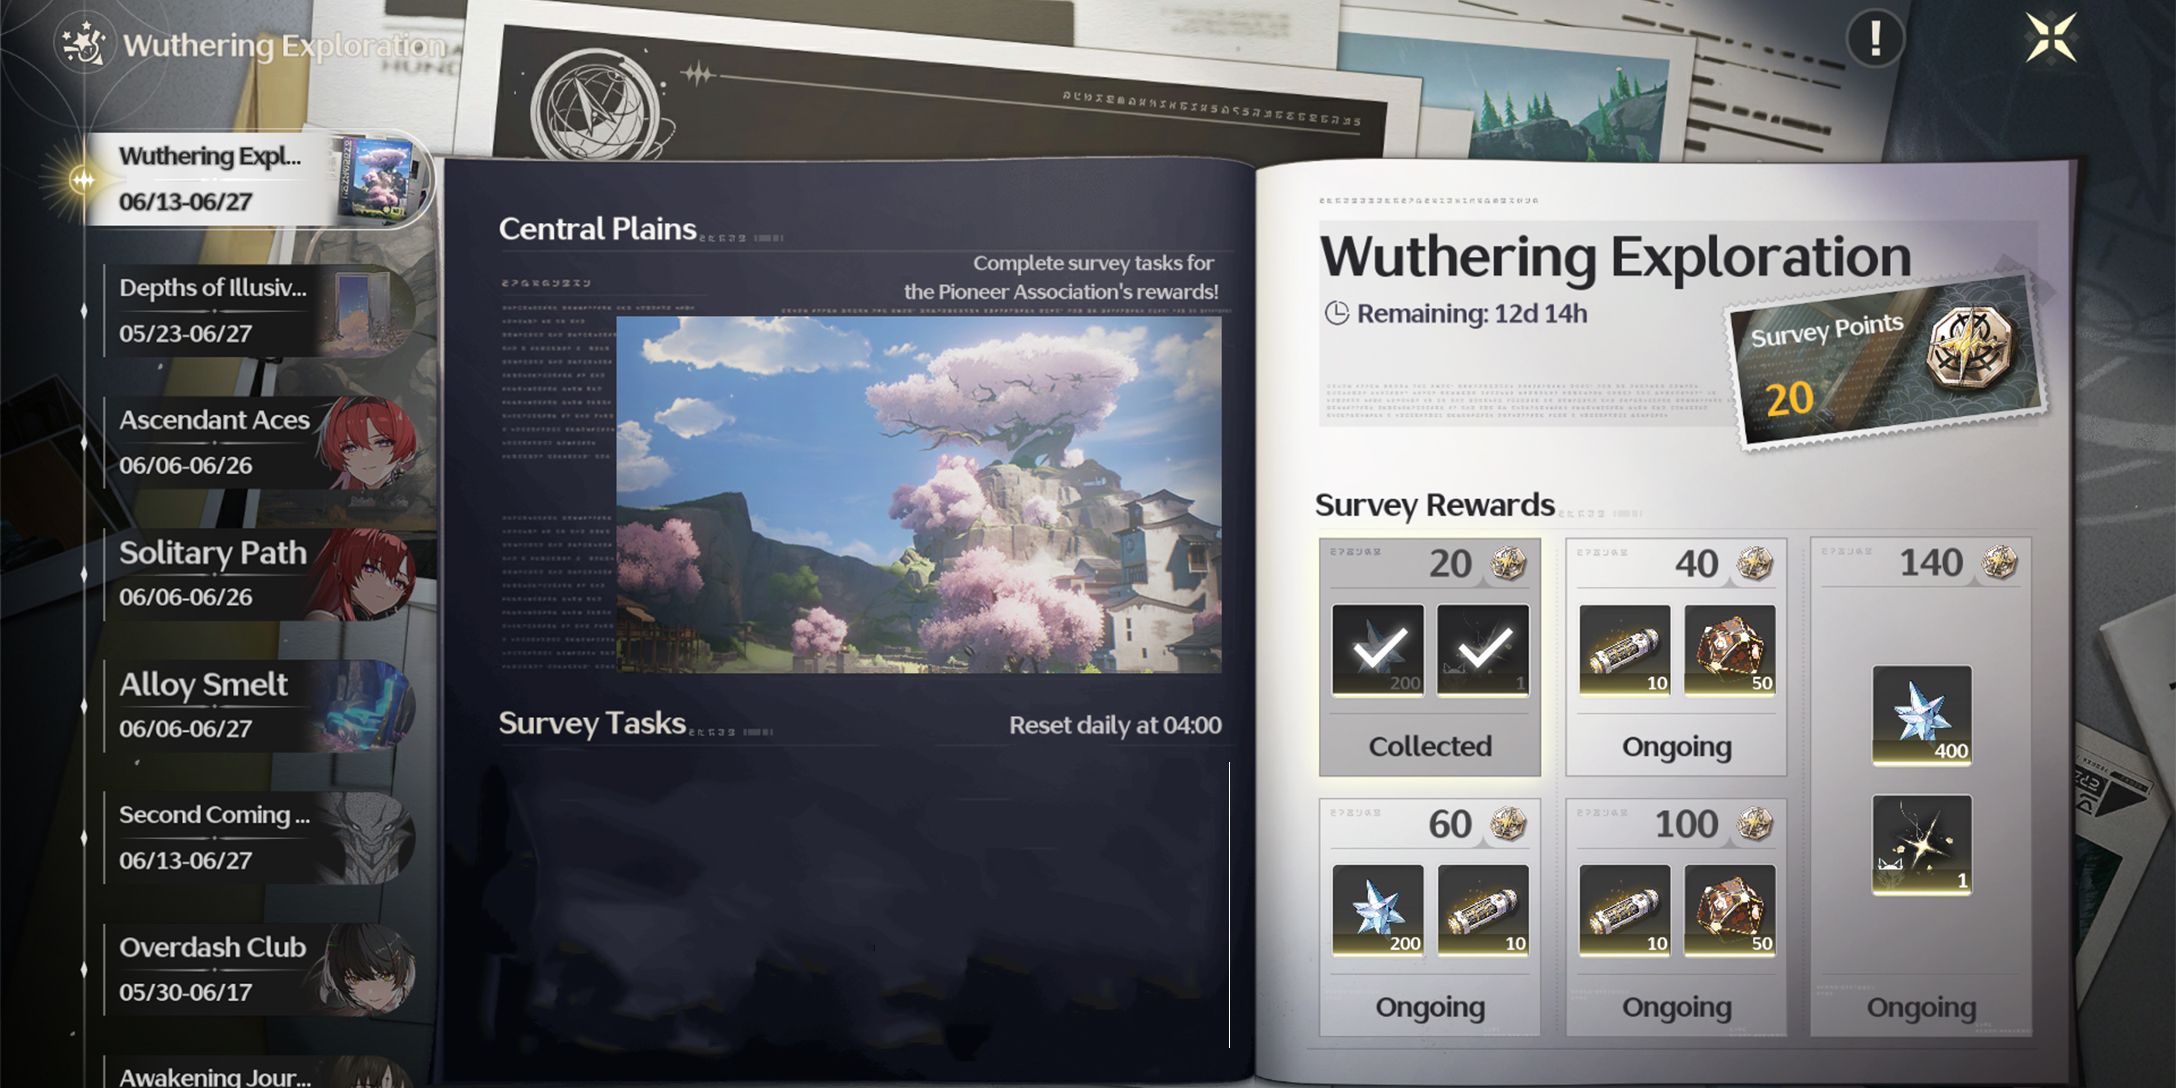 wuwa wuthering waves exploration event survey task central plains